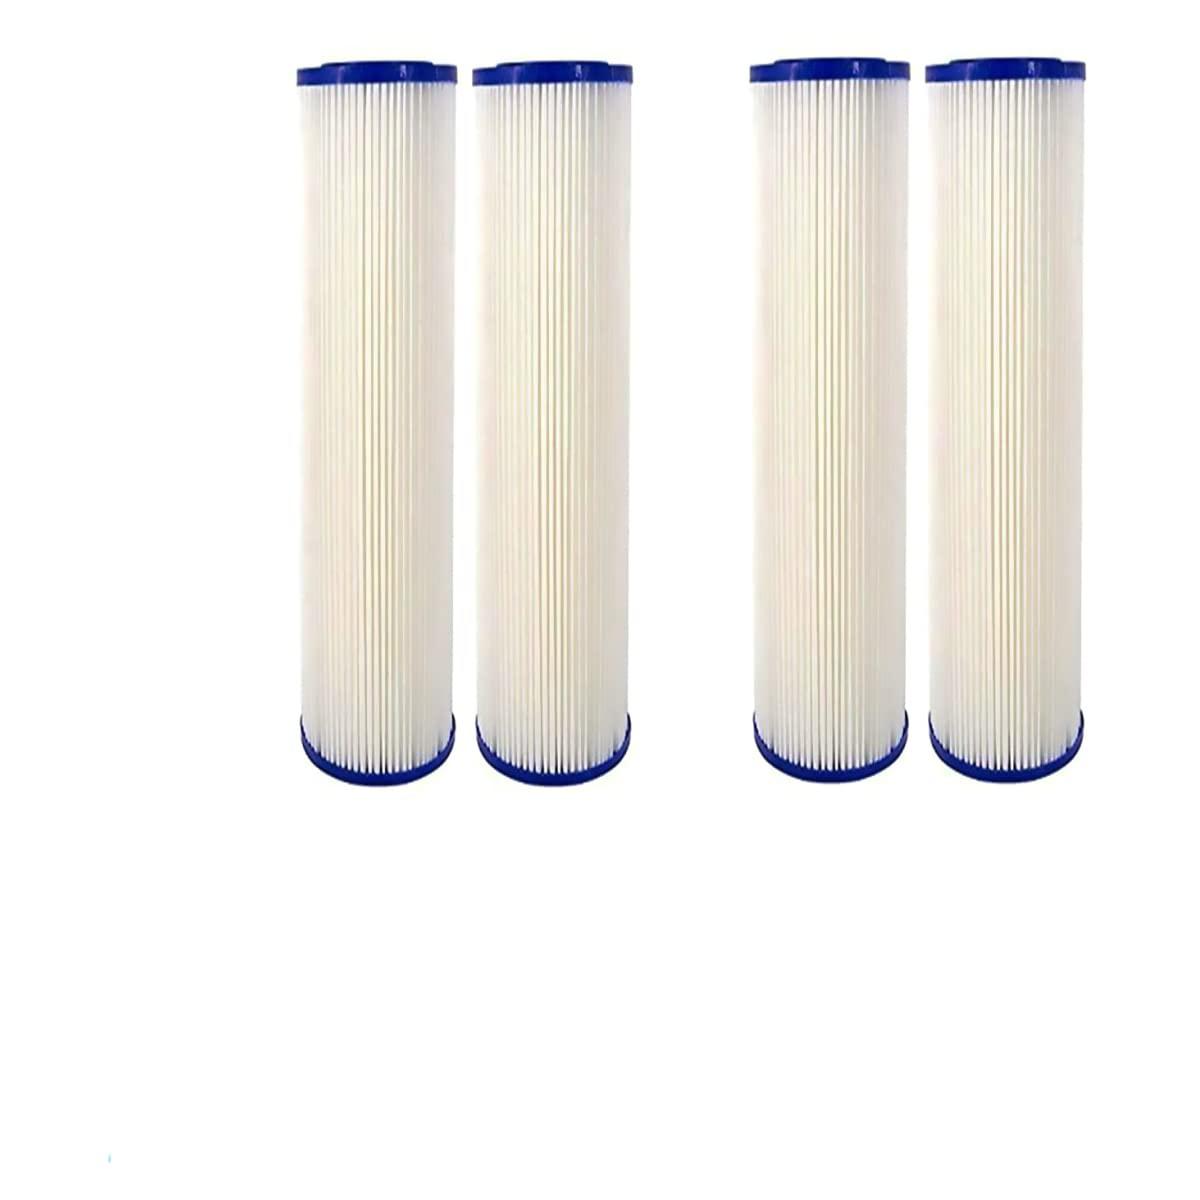 CFS COMPLETE FILTRATION SERVICES EST.2006 compatible to watts pack of 4 filter (wpc0.35-975) 9.75"x2.75" 0.35 micron pleated sediment filters